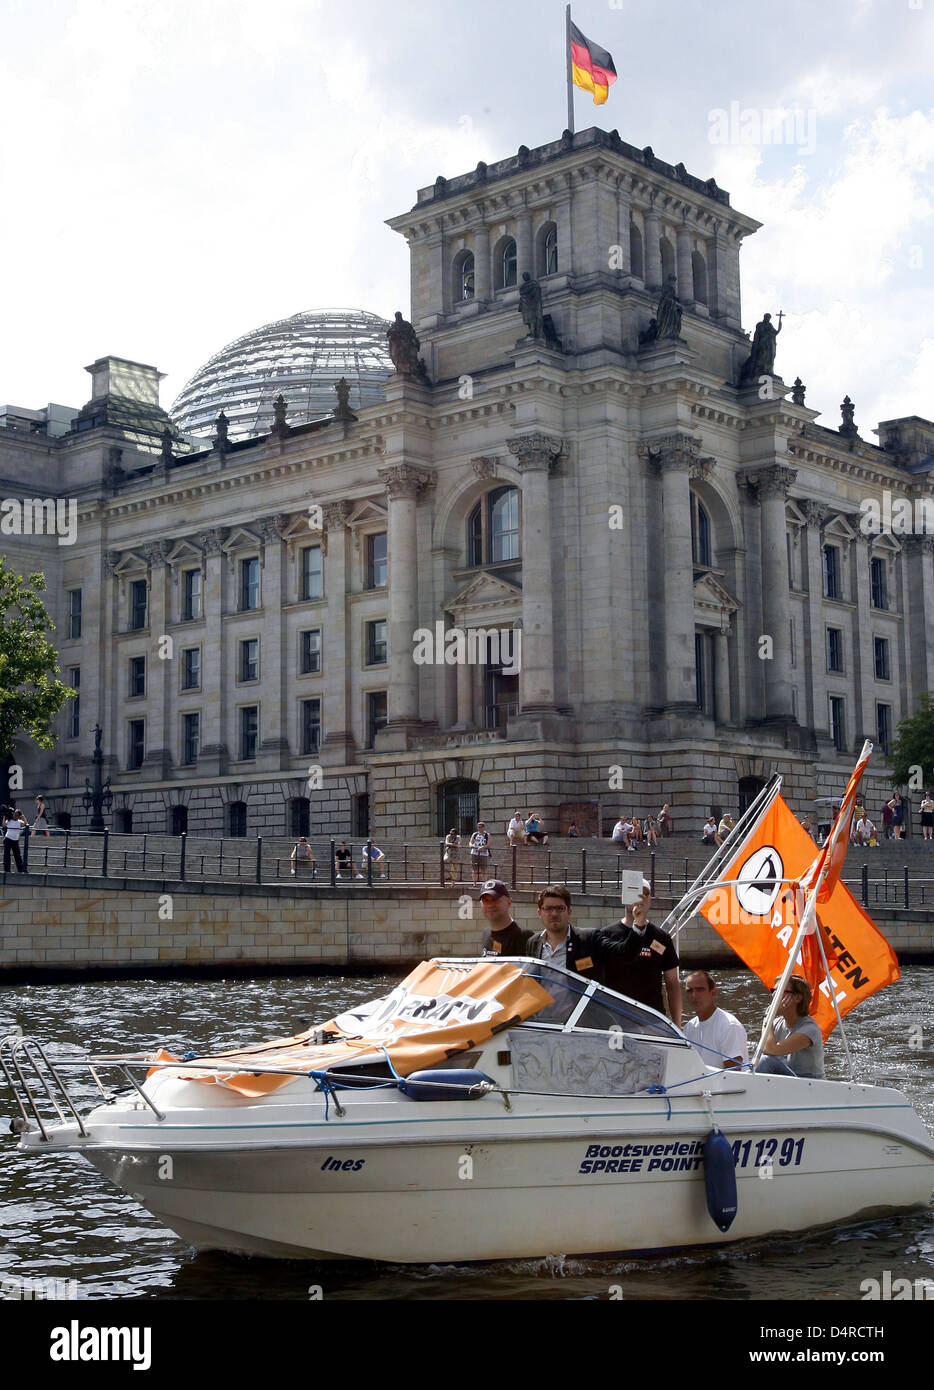 Members of Pirate Party ride a boat on Spree river past the Reichstag building in Berlin, Germany, 07 August 2009. Fitting their name, the new party kicked off their election campaign for the federal elections, held on 27 September 2009, on the German capital?s waterways. Photo: WOLFGANG KUMM Stock Photo